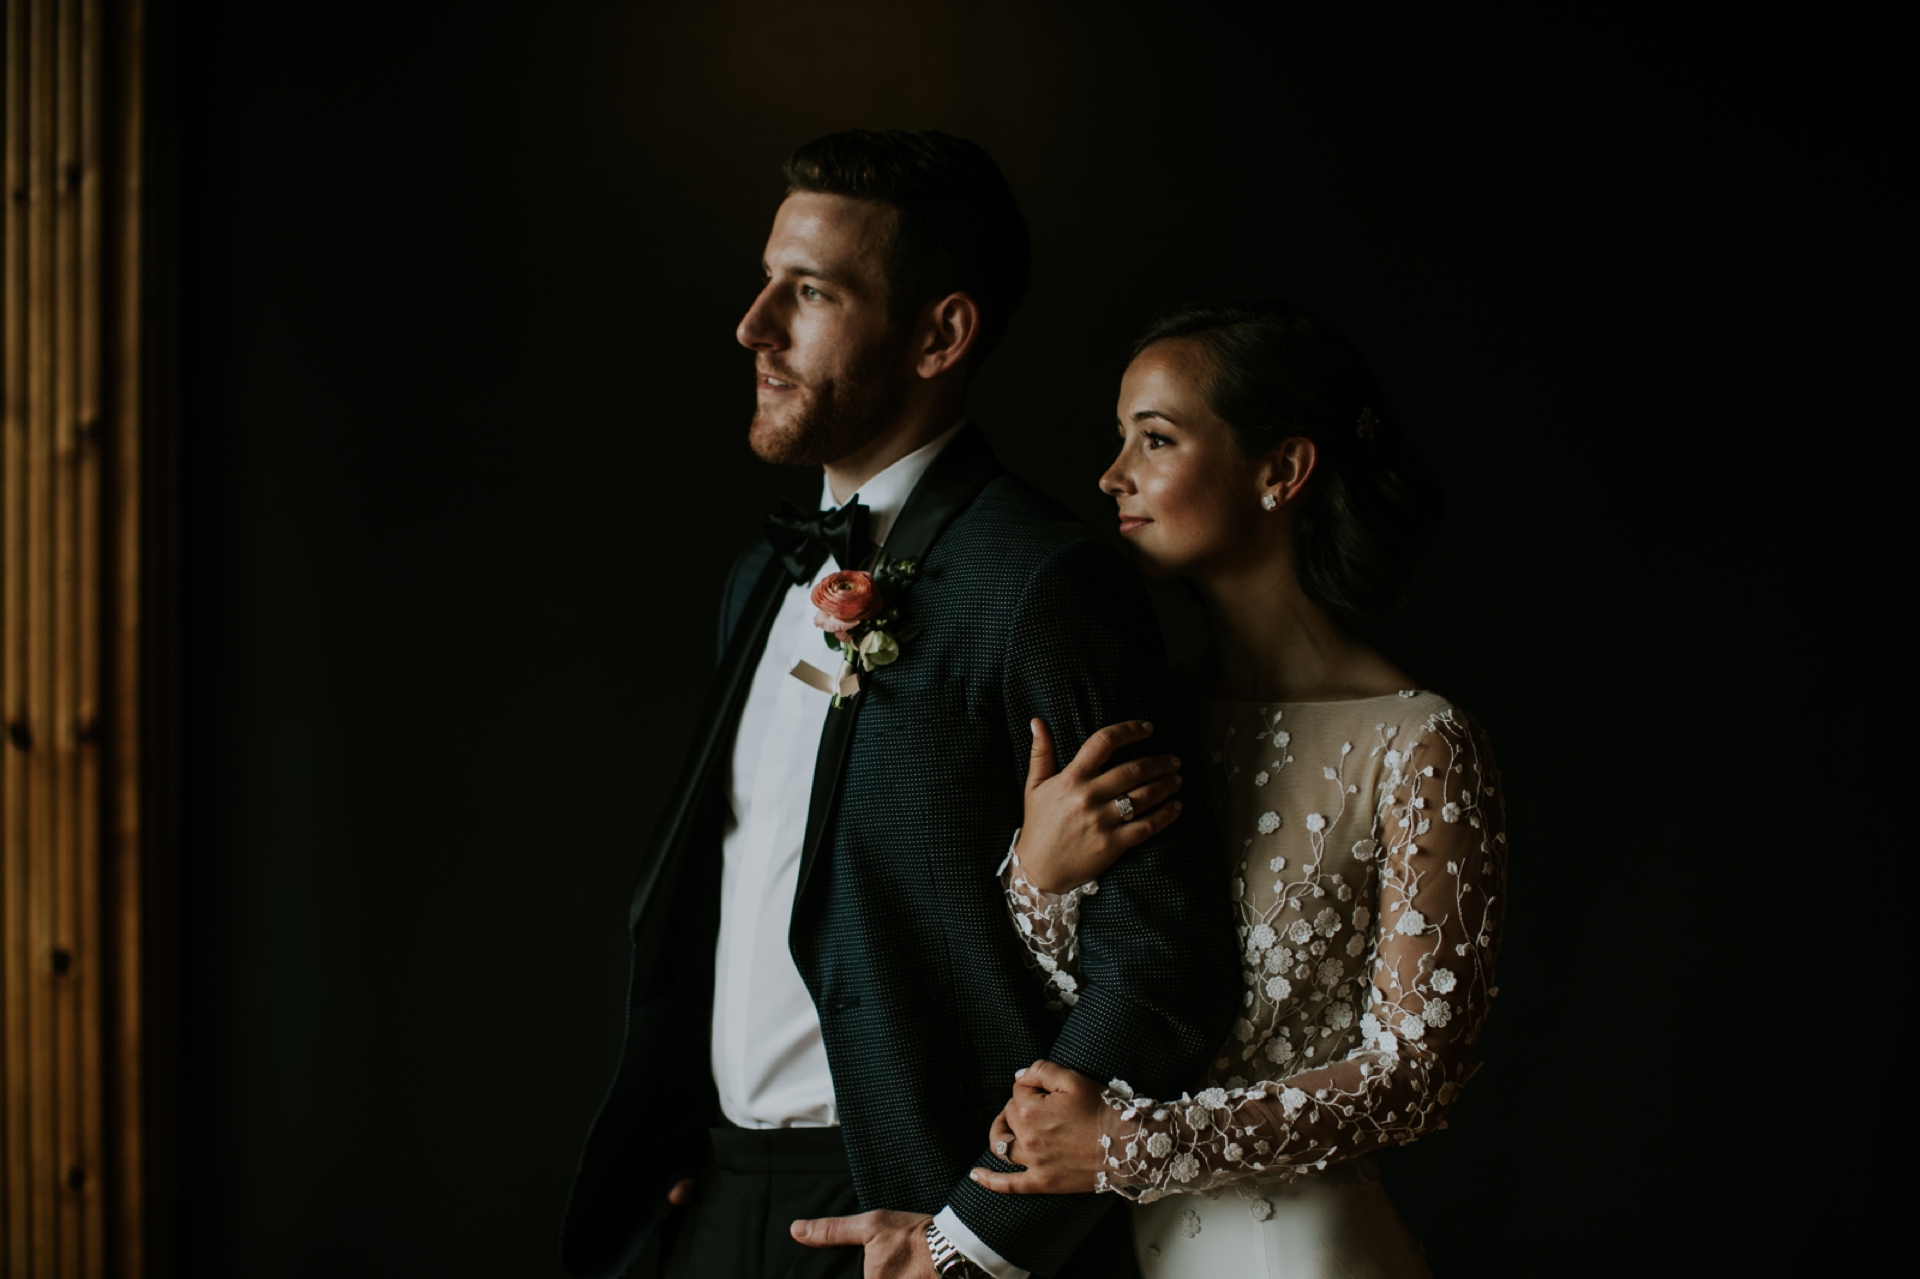 bride in modern chic wedding dress stands with groom in two piece tux in moody window light, woman behind man and clutching his arm